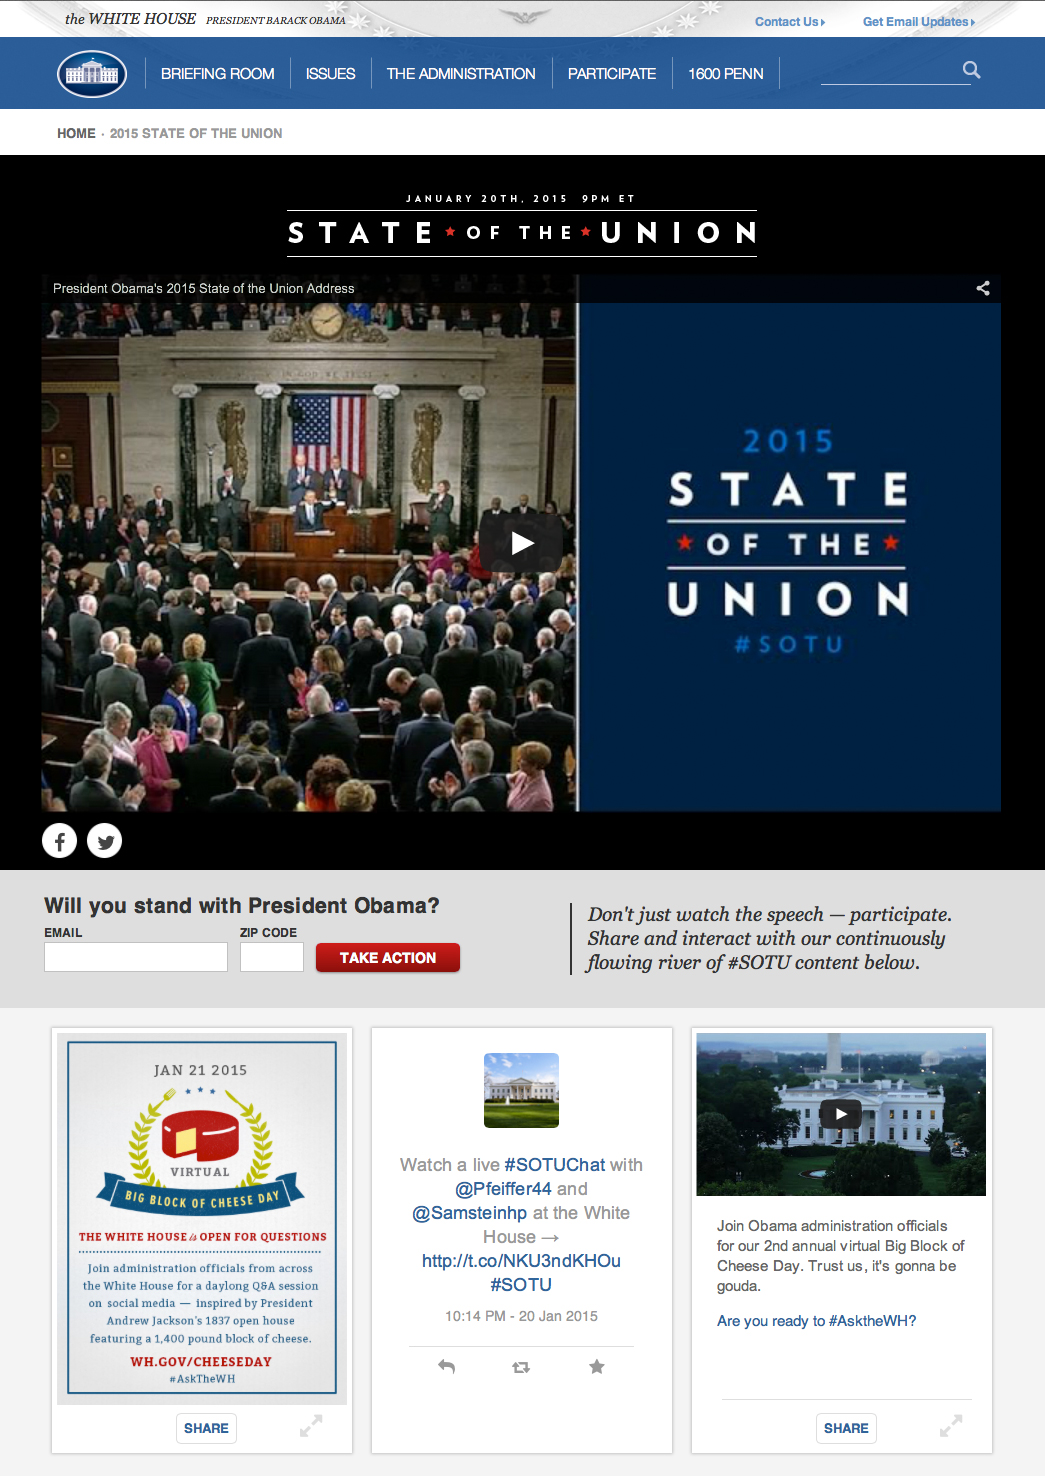 screenshot image of the 2015 State of the Union page